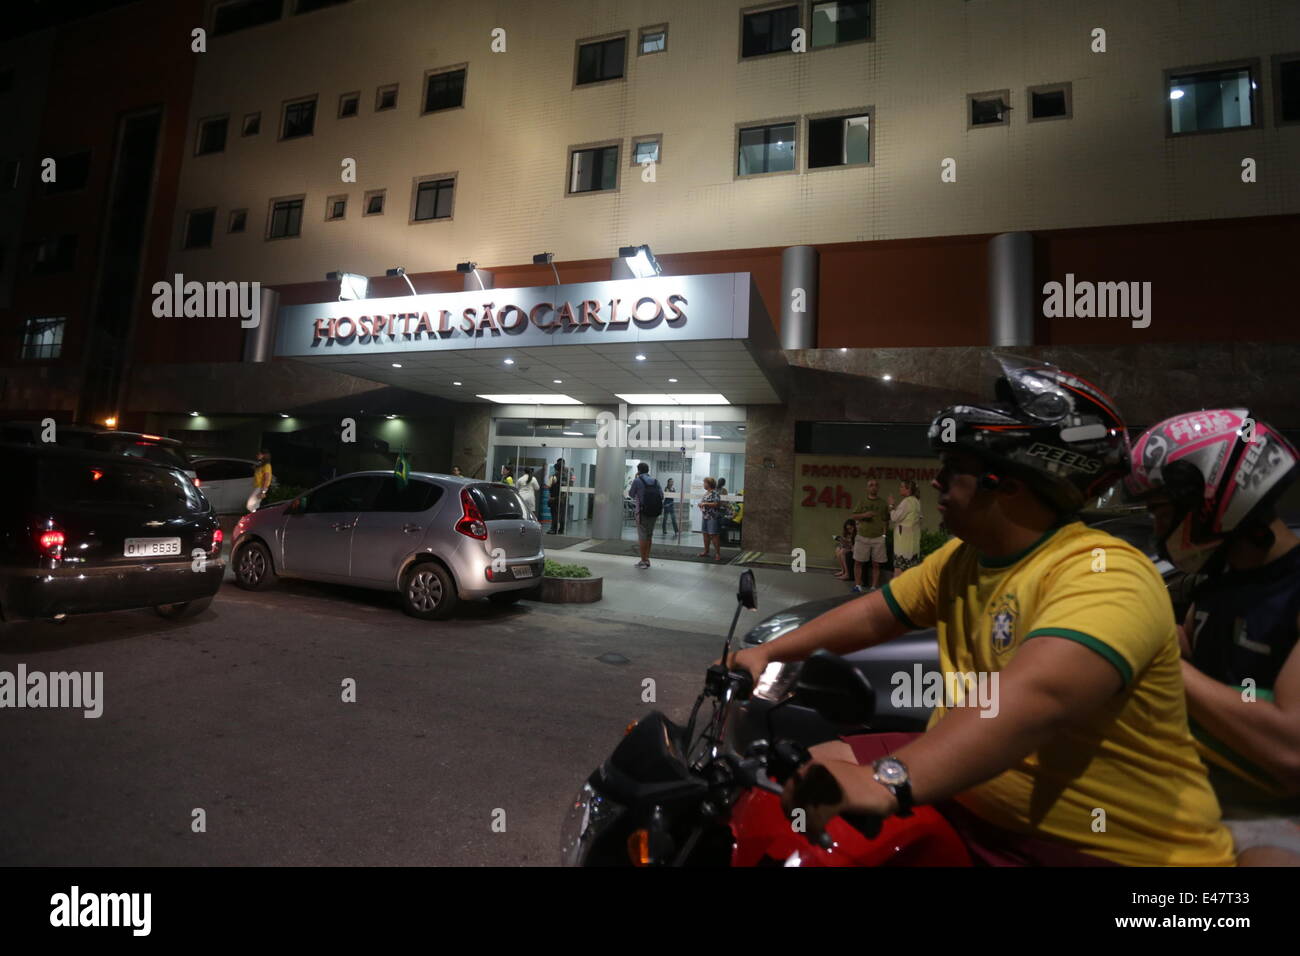 Fortaleza, Brazil. 4th July, 2014. Vehicles traveled in front of the hospital in which Brazil's Neymar is hospitalized after the quarterfinal match between Brazil and Colombia of 2014 Brazil FIFA World Cup, in Fortaleza, Brazil, on July 4, 2014. Team doctor Rodrigo Lasmar said Neymar fractured his third vertebra when he was kneed in the back by Colombia defender Juan Camilo Zuniga. Brazil has shown grit under the intense pressure of home expectation. But getting past its next opponent Germany will be a big task without the genius of Neymar. Credit:  AGENCIA ESTADO/Xinhua/Alamy Live News Stock Photo